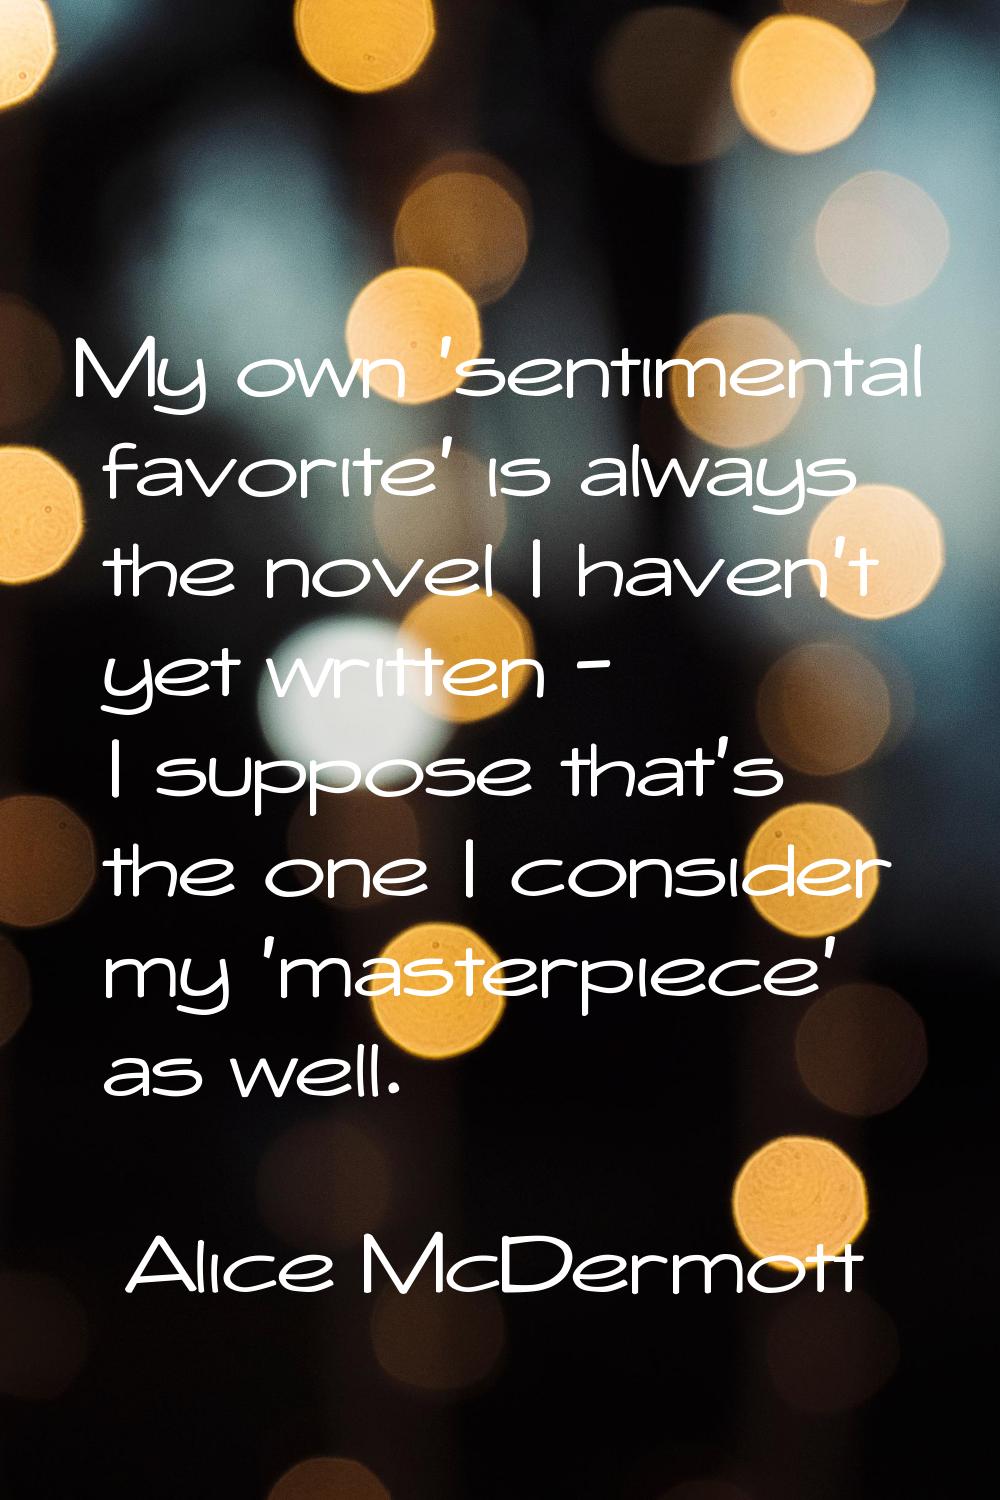 My own 'sentimental favorite' is always the novel I haven't yet written - I suppose that's the one 